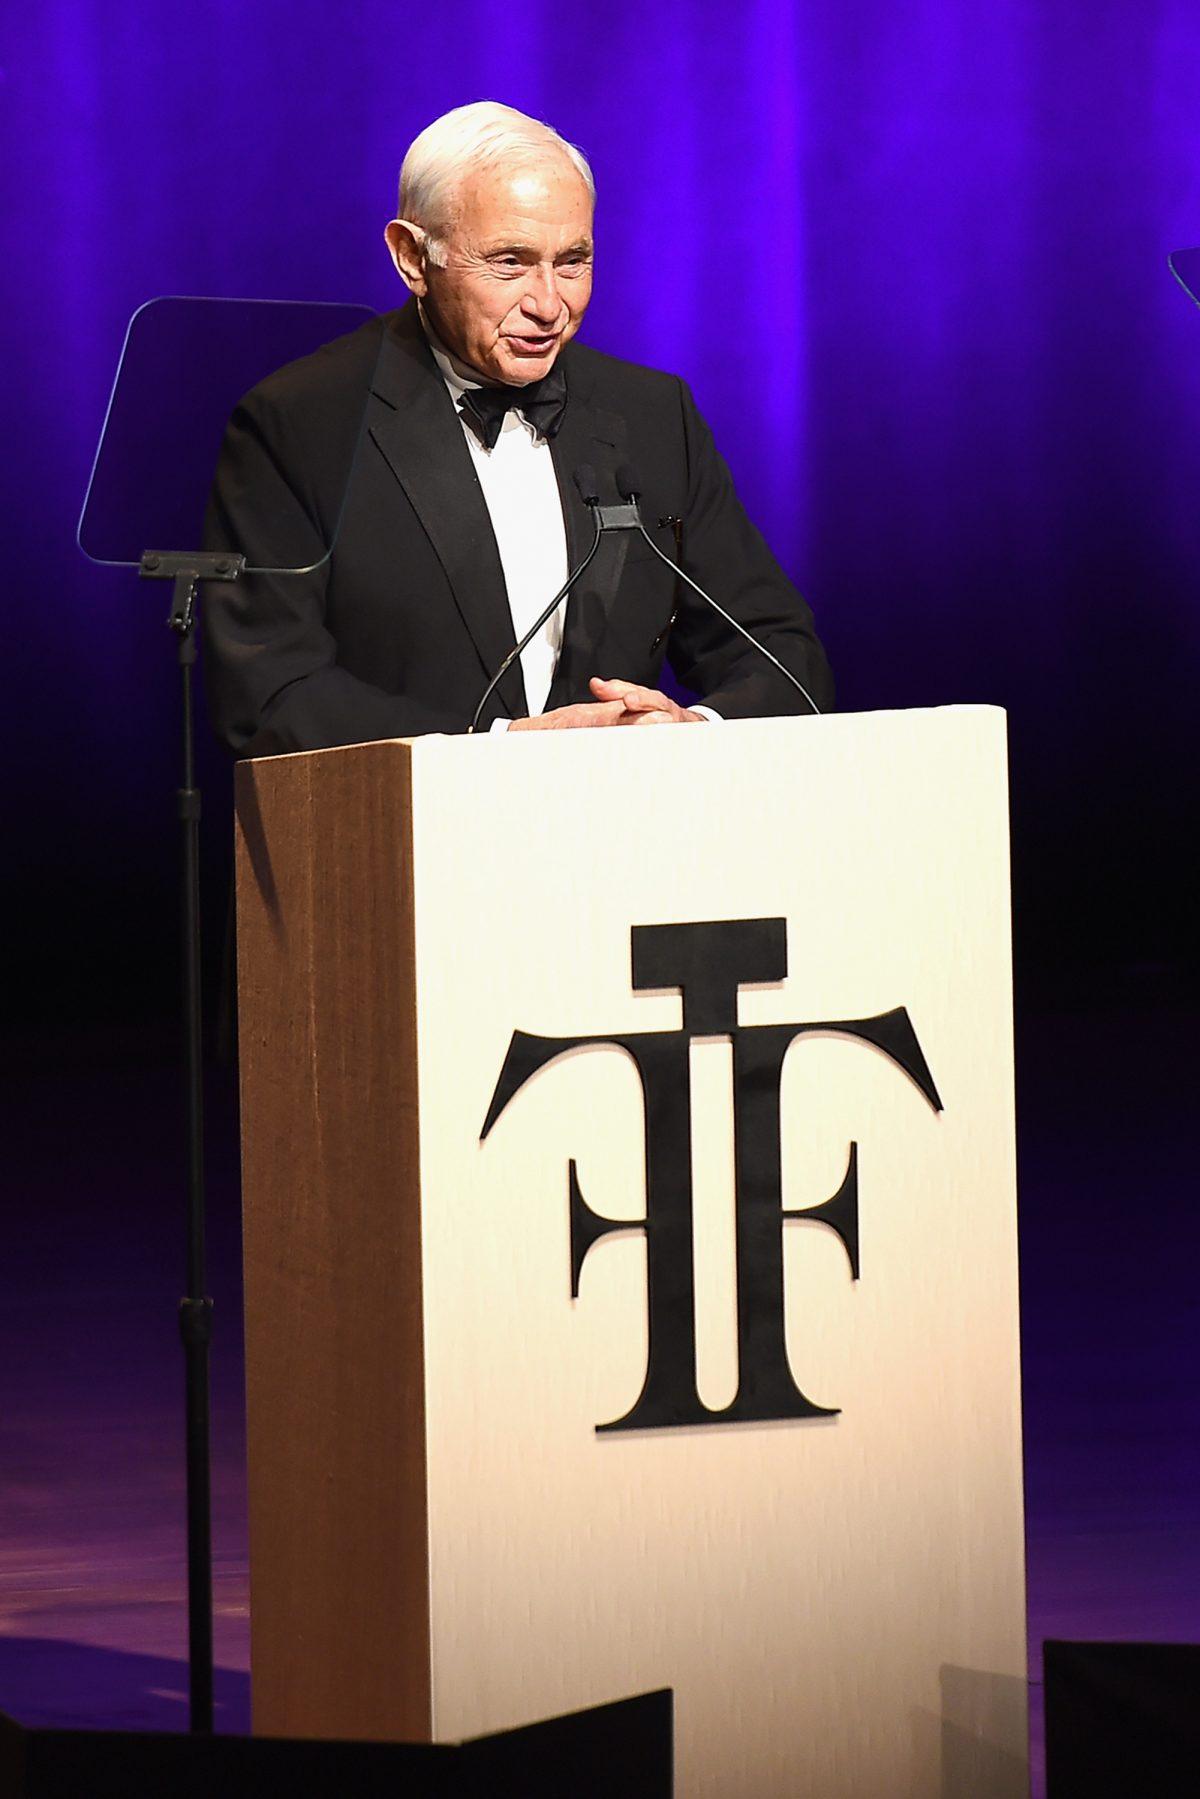 Les Wexner speaks onstage at the 2016 Fragrance Foundation Awards presented by Hearst Magazines - Show in New York City on June 7, 2016. (Photo by Nicholas Hunt/Getty Images for Fragrance Foundation)